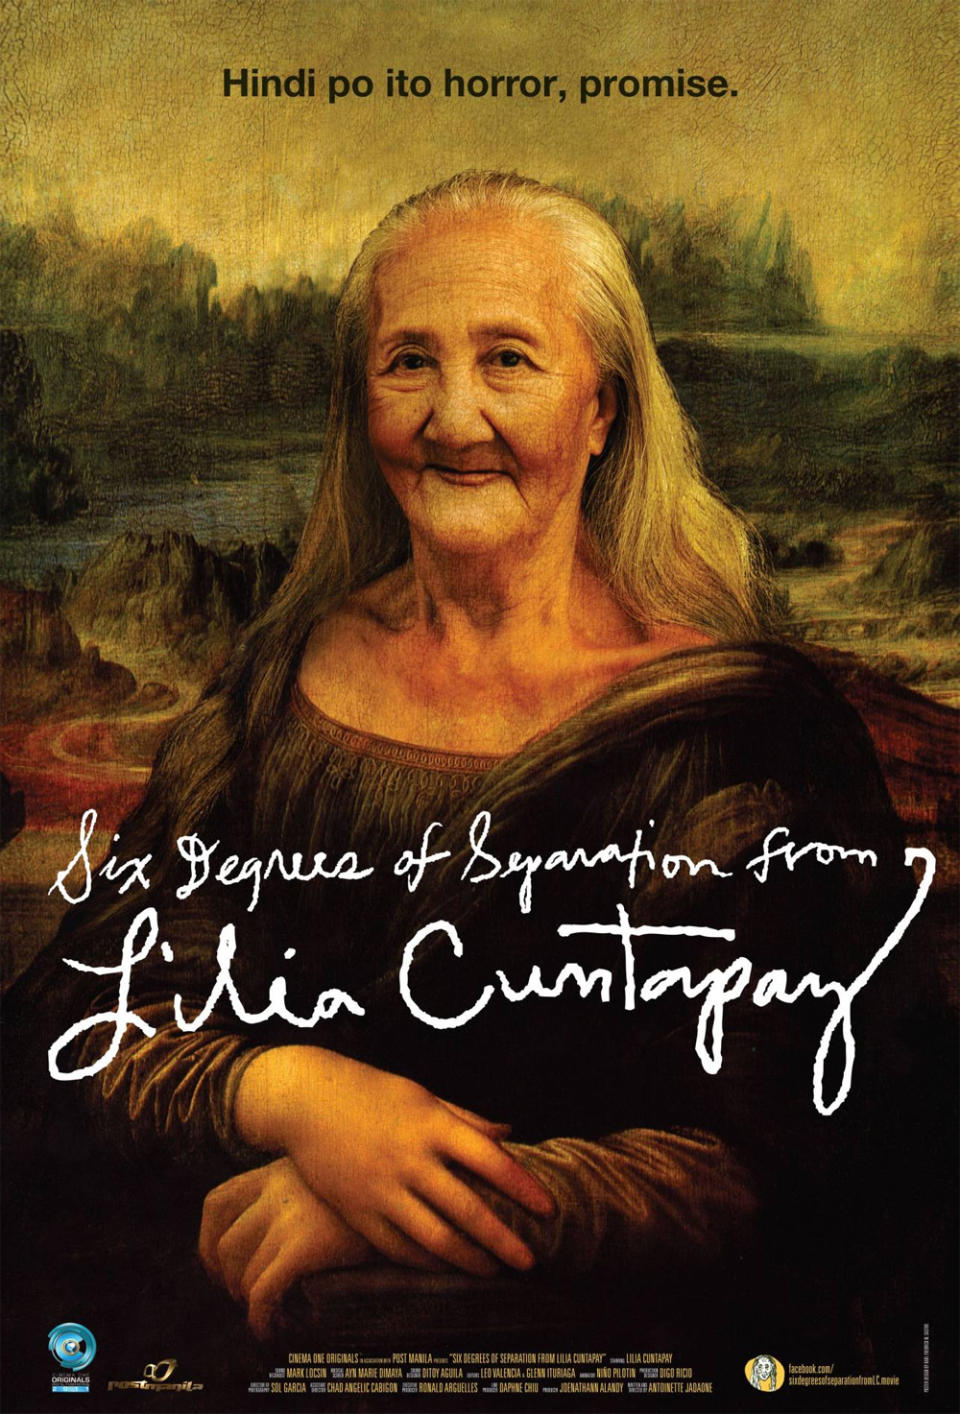 Six Degrees of Separation from Lilia Cuntapay Poster